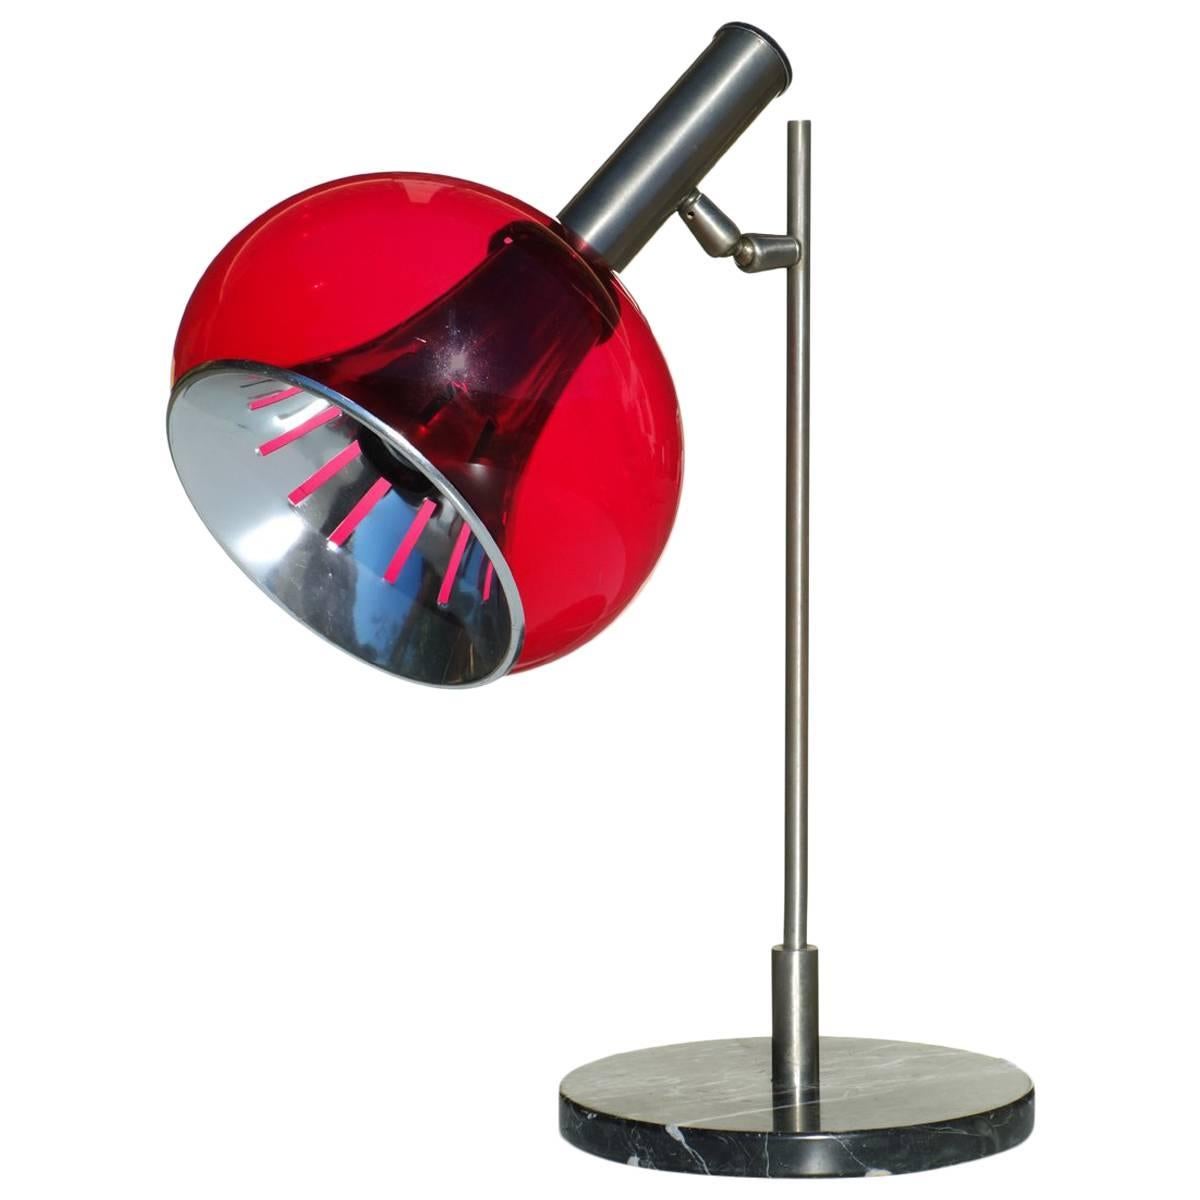 Lamter Table Lamp Italian Design Midcentury Italy 1950s Black Marble Red Perspex For Sale